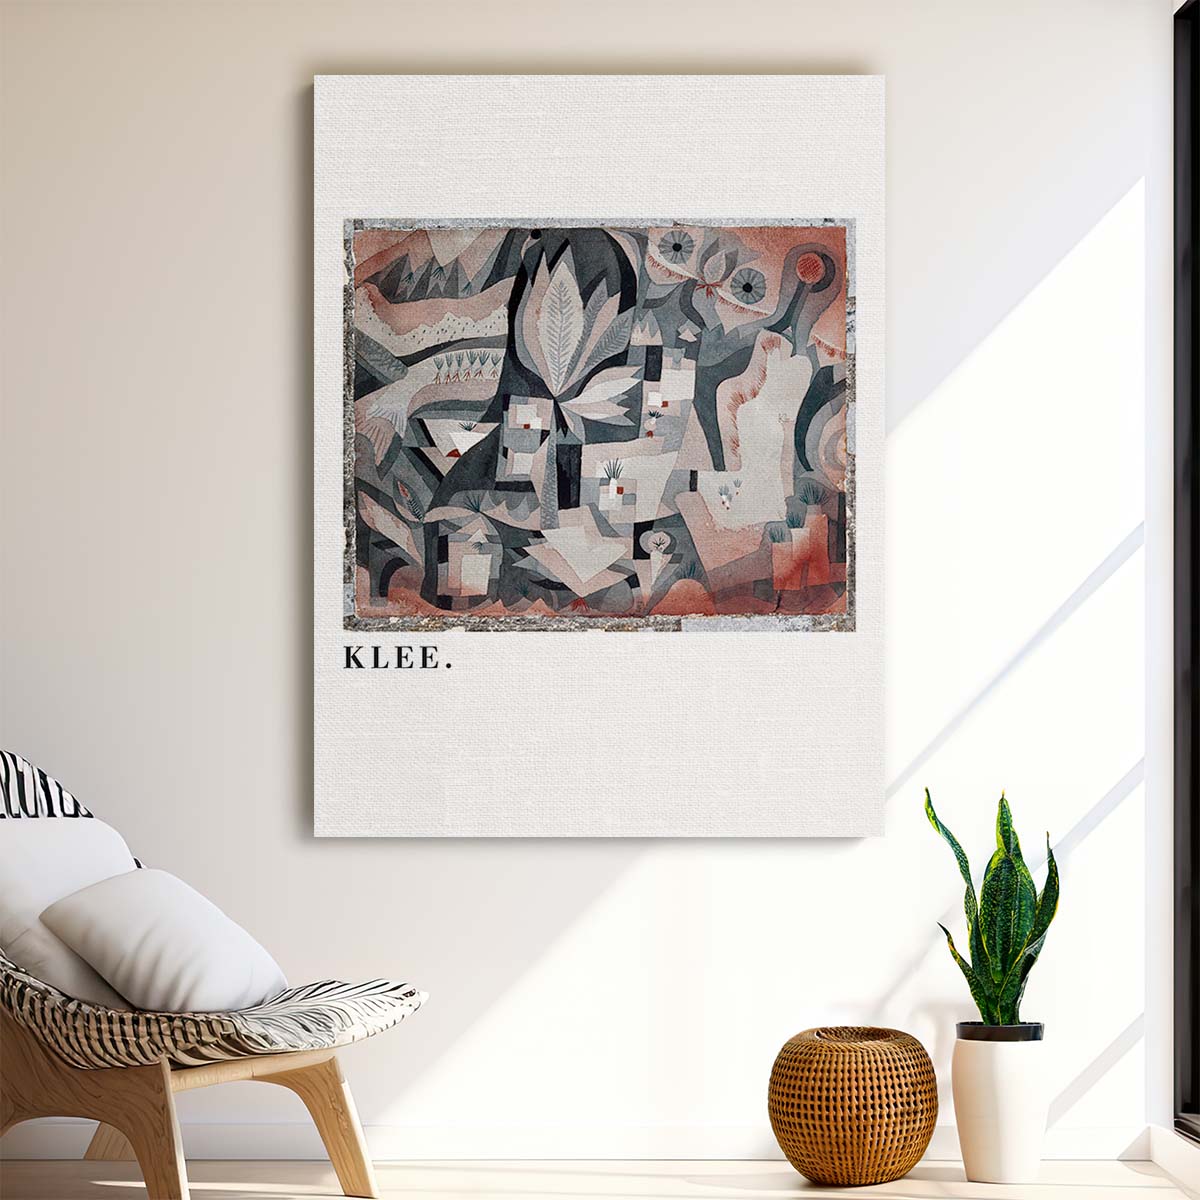 Paul Klee 1921 Abstract Garden Illustration, Modern Art Poster by Luxuriance Designs, made in USA